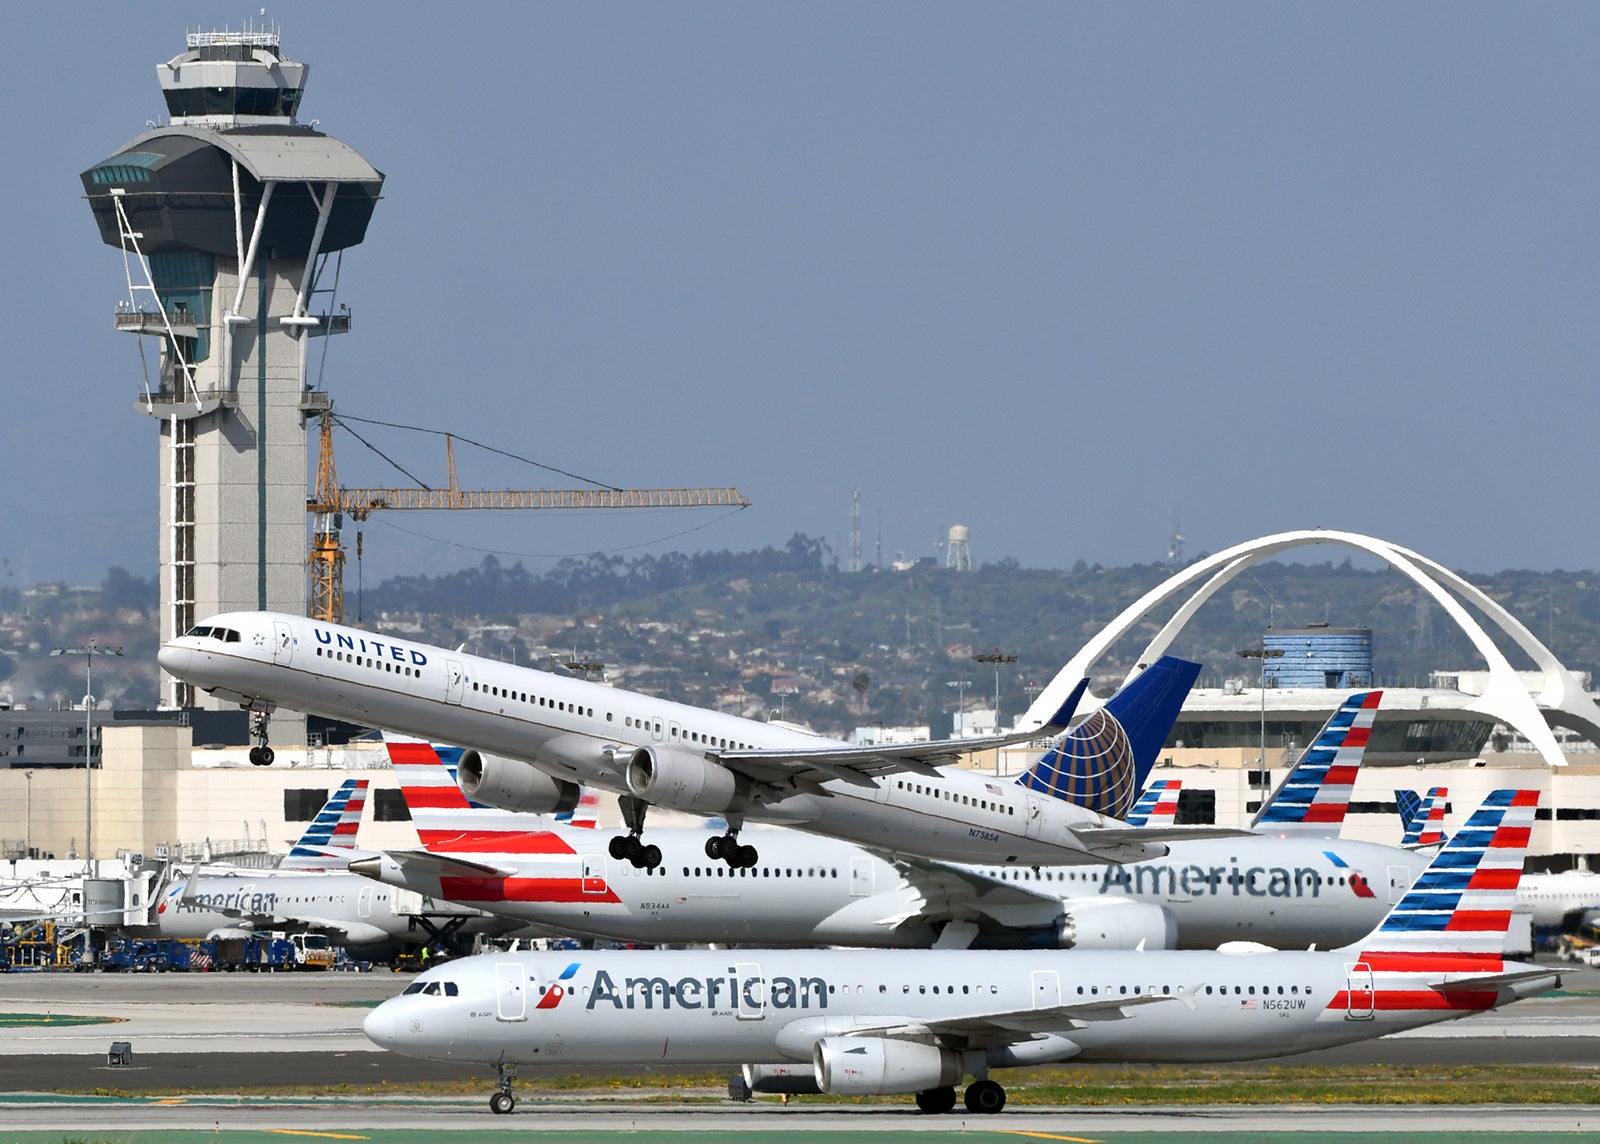 American and United at LAX